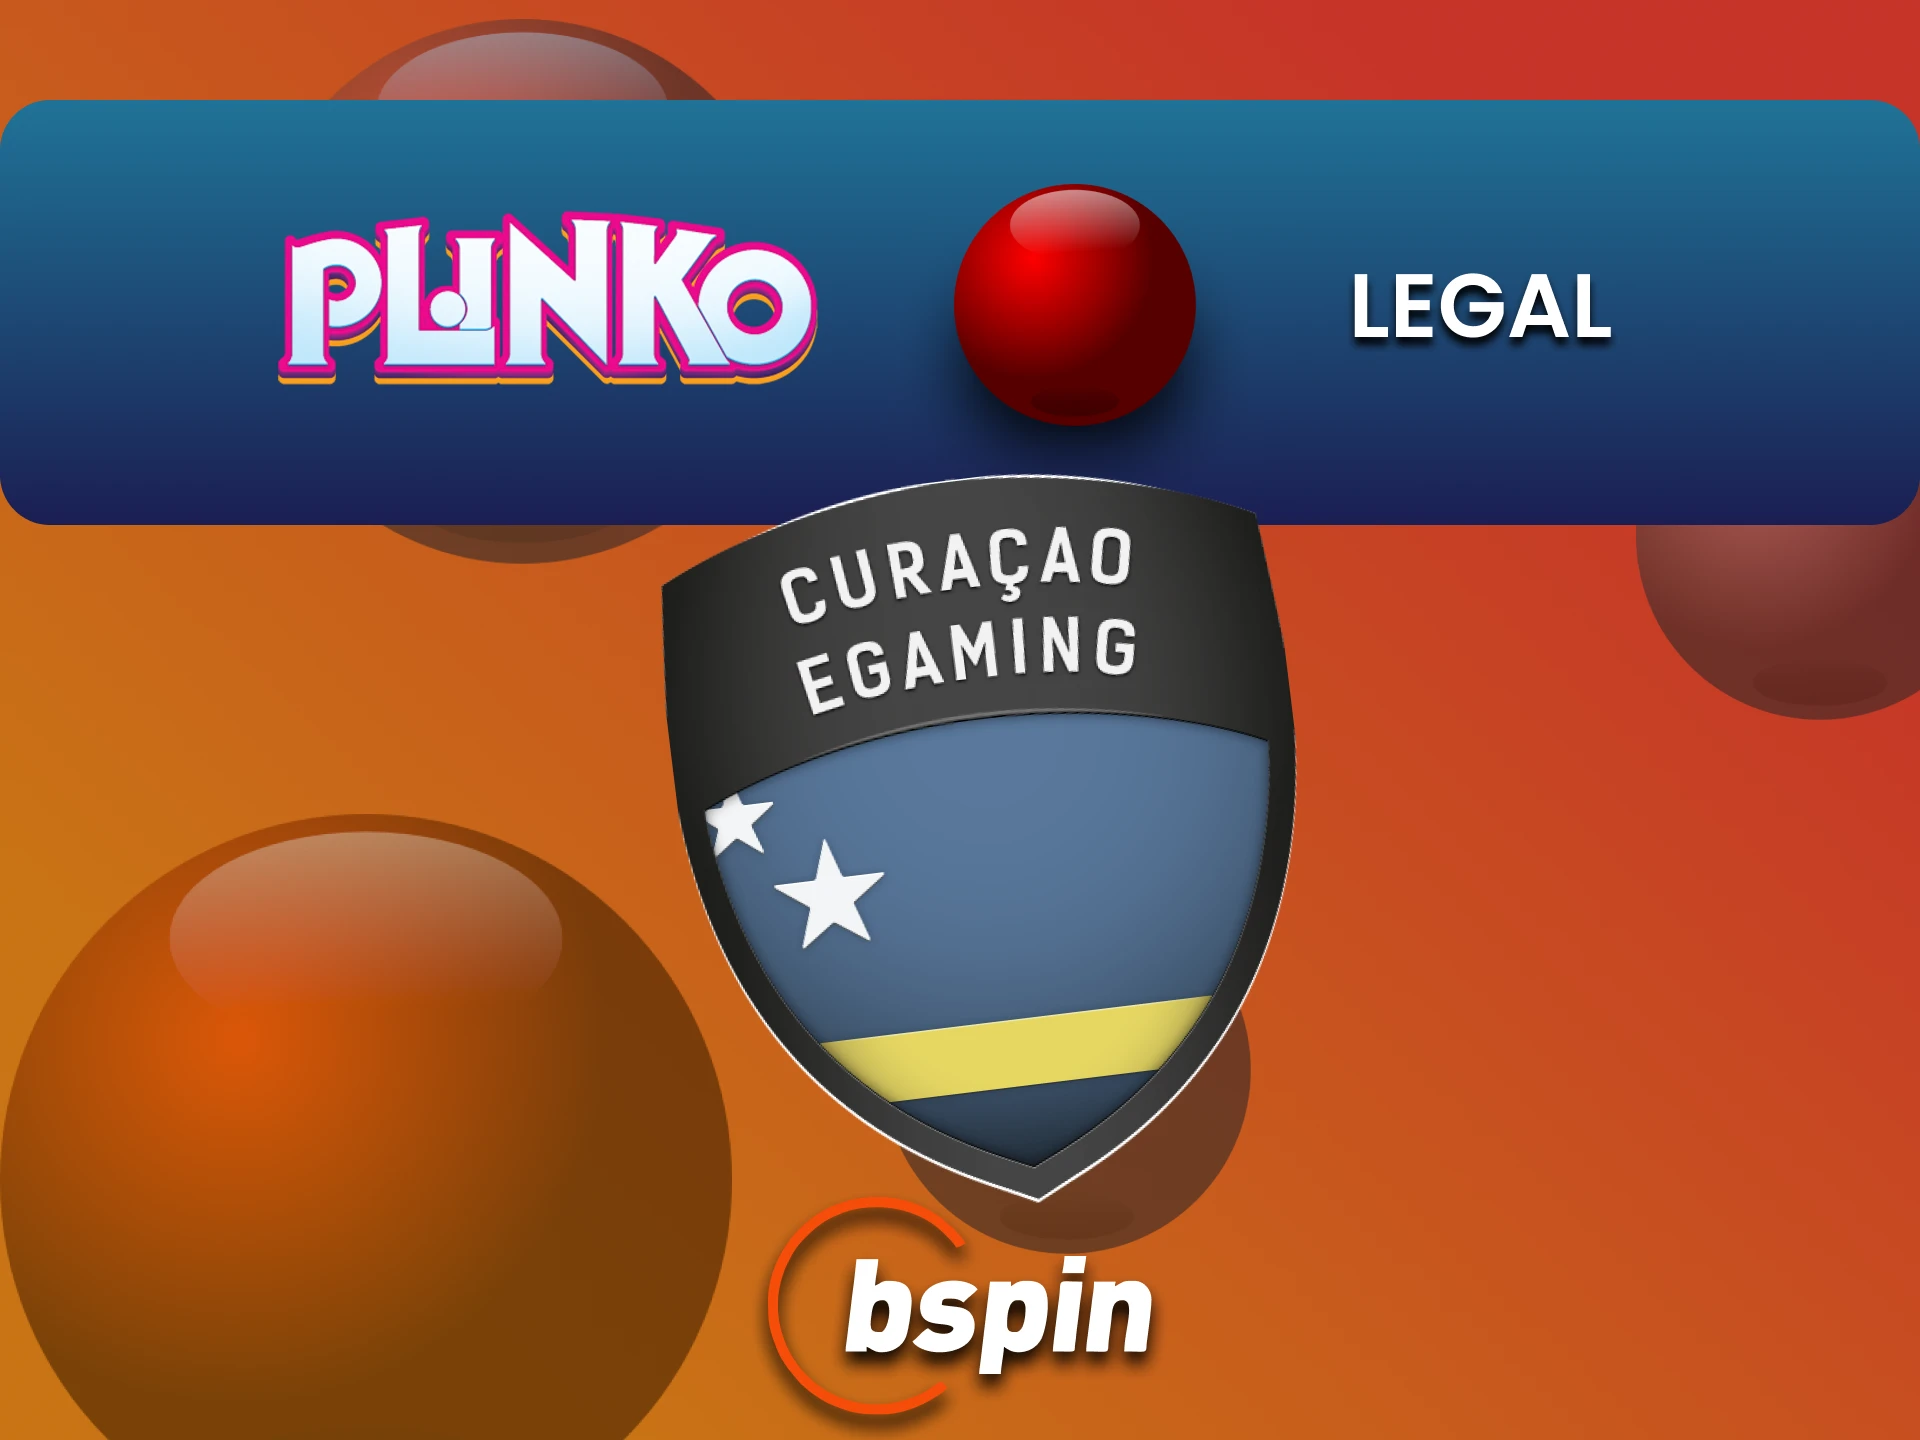 Bspin is legal to play Plinko in India.